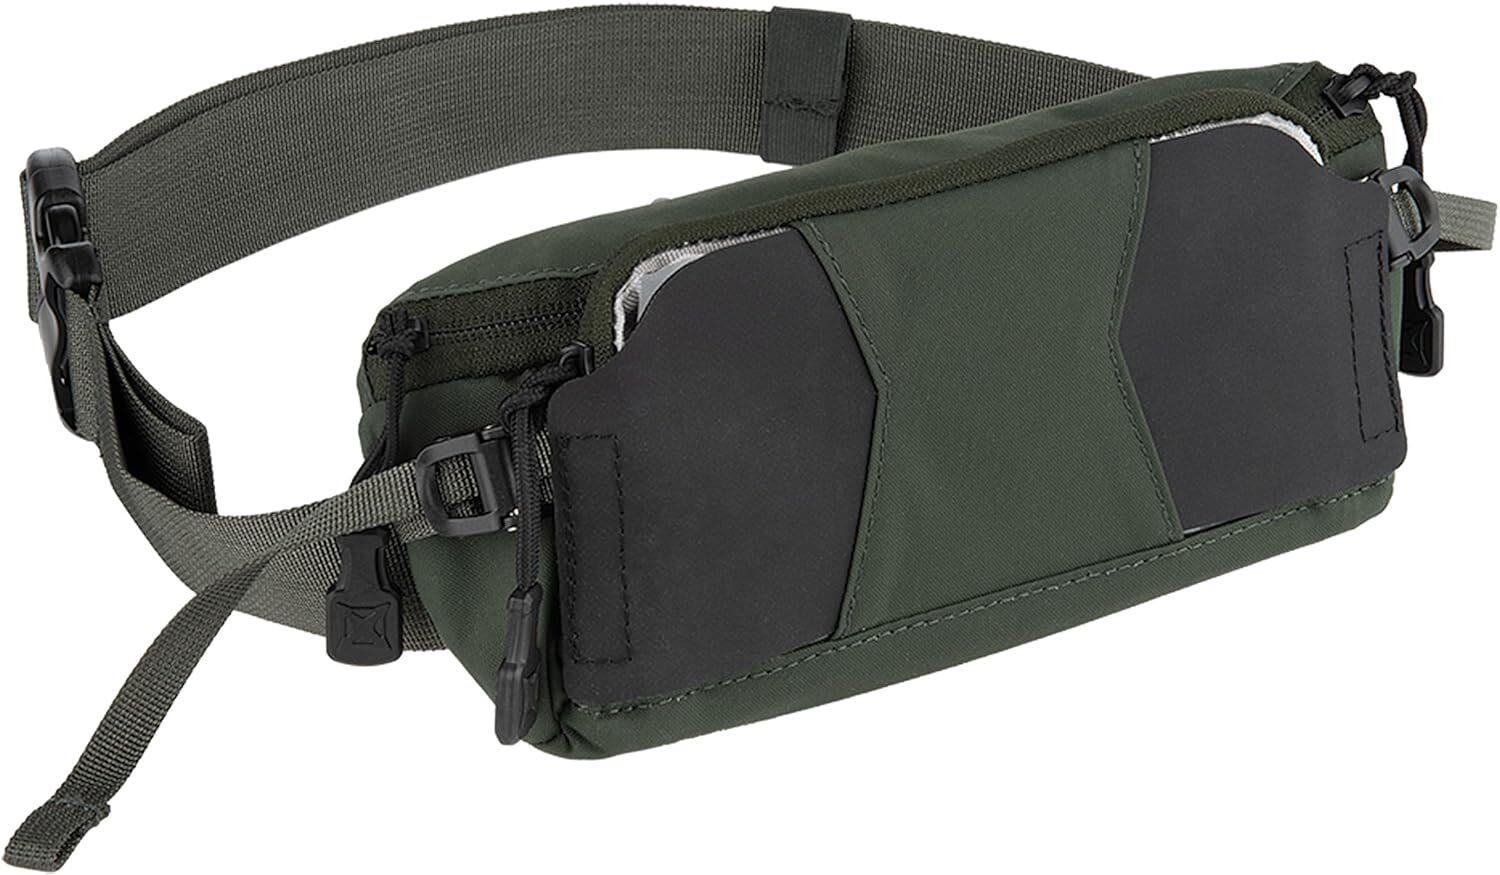 Vertx S.O.C.P. Sling Pack, One Size, Green